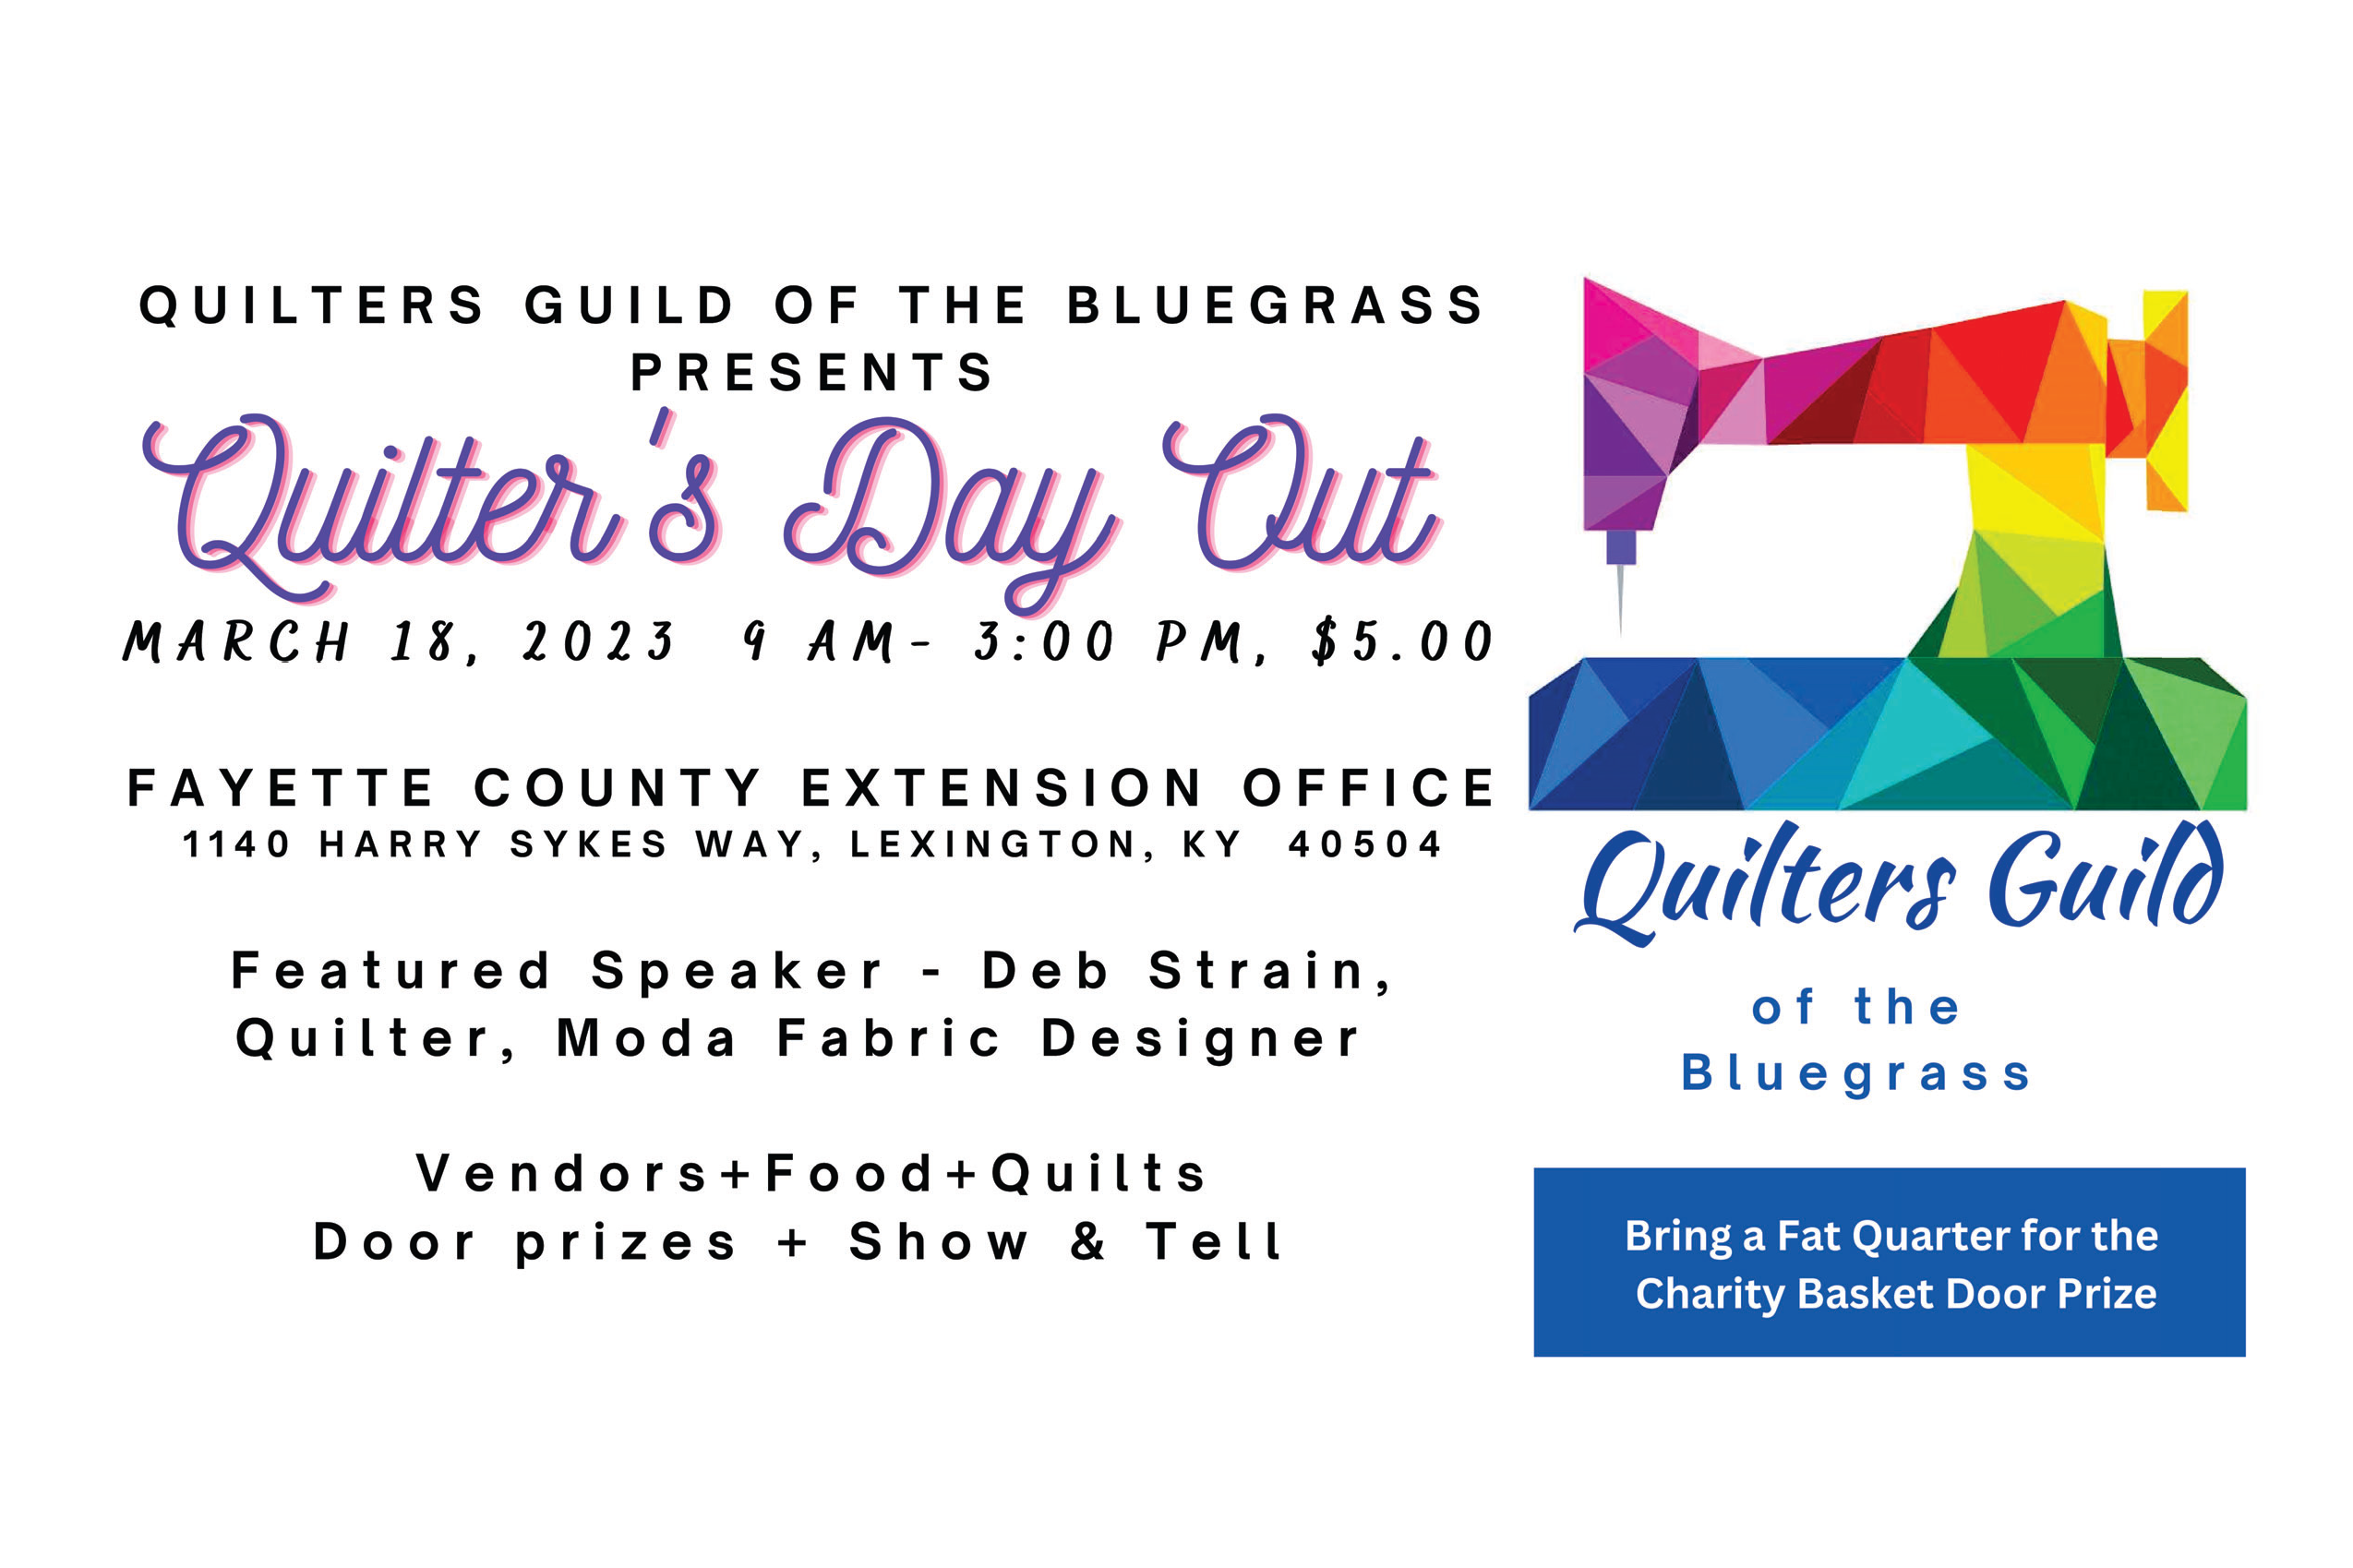 Quilter's Day Out Promo - March 18, 2023, 9AM - 3PM, $5, 1140 Sykes Way, Lexington, KY 40504